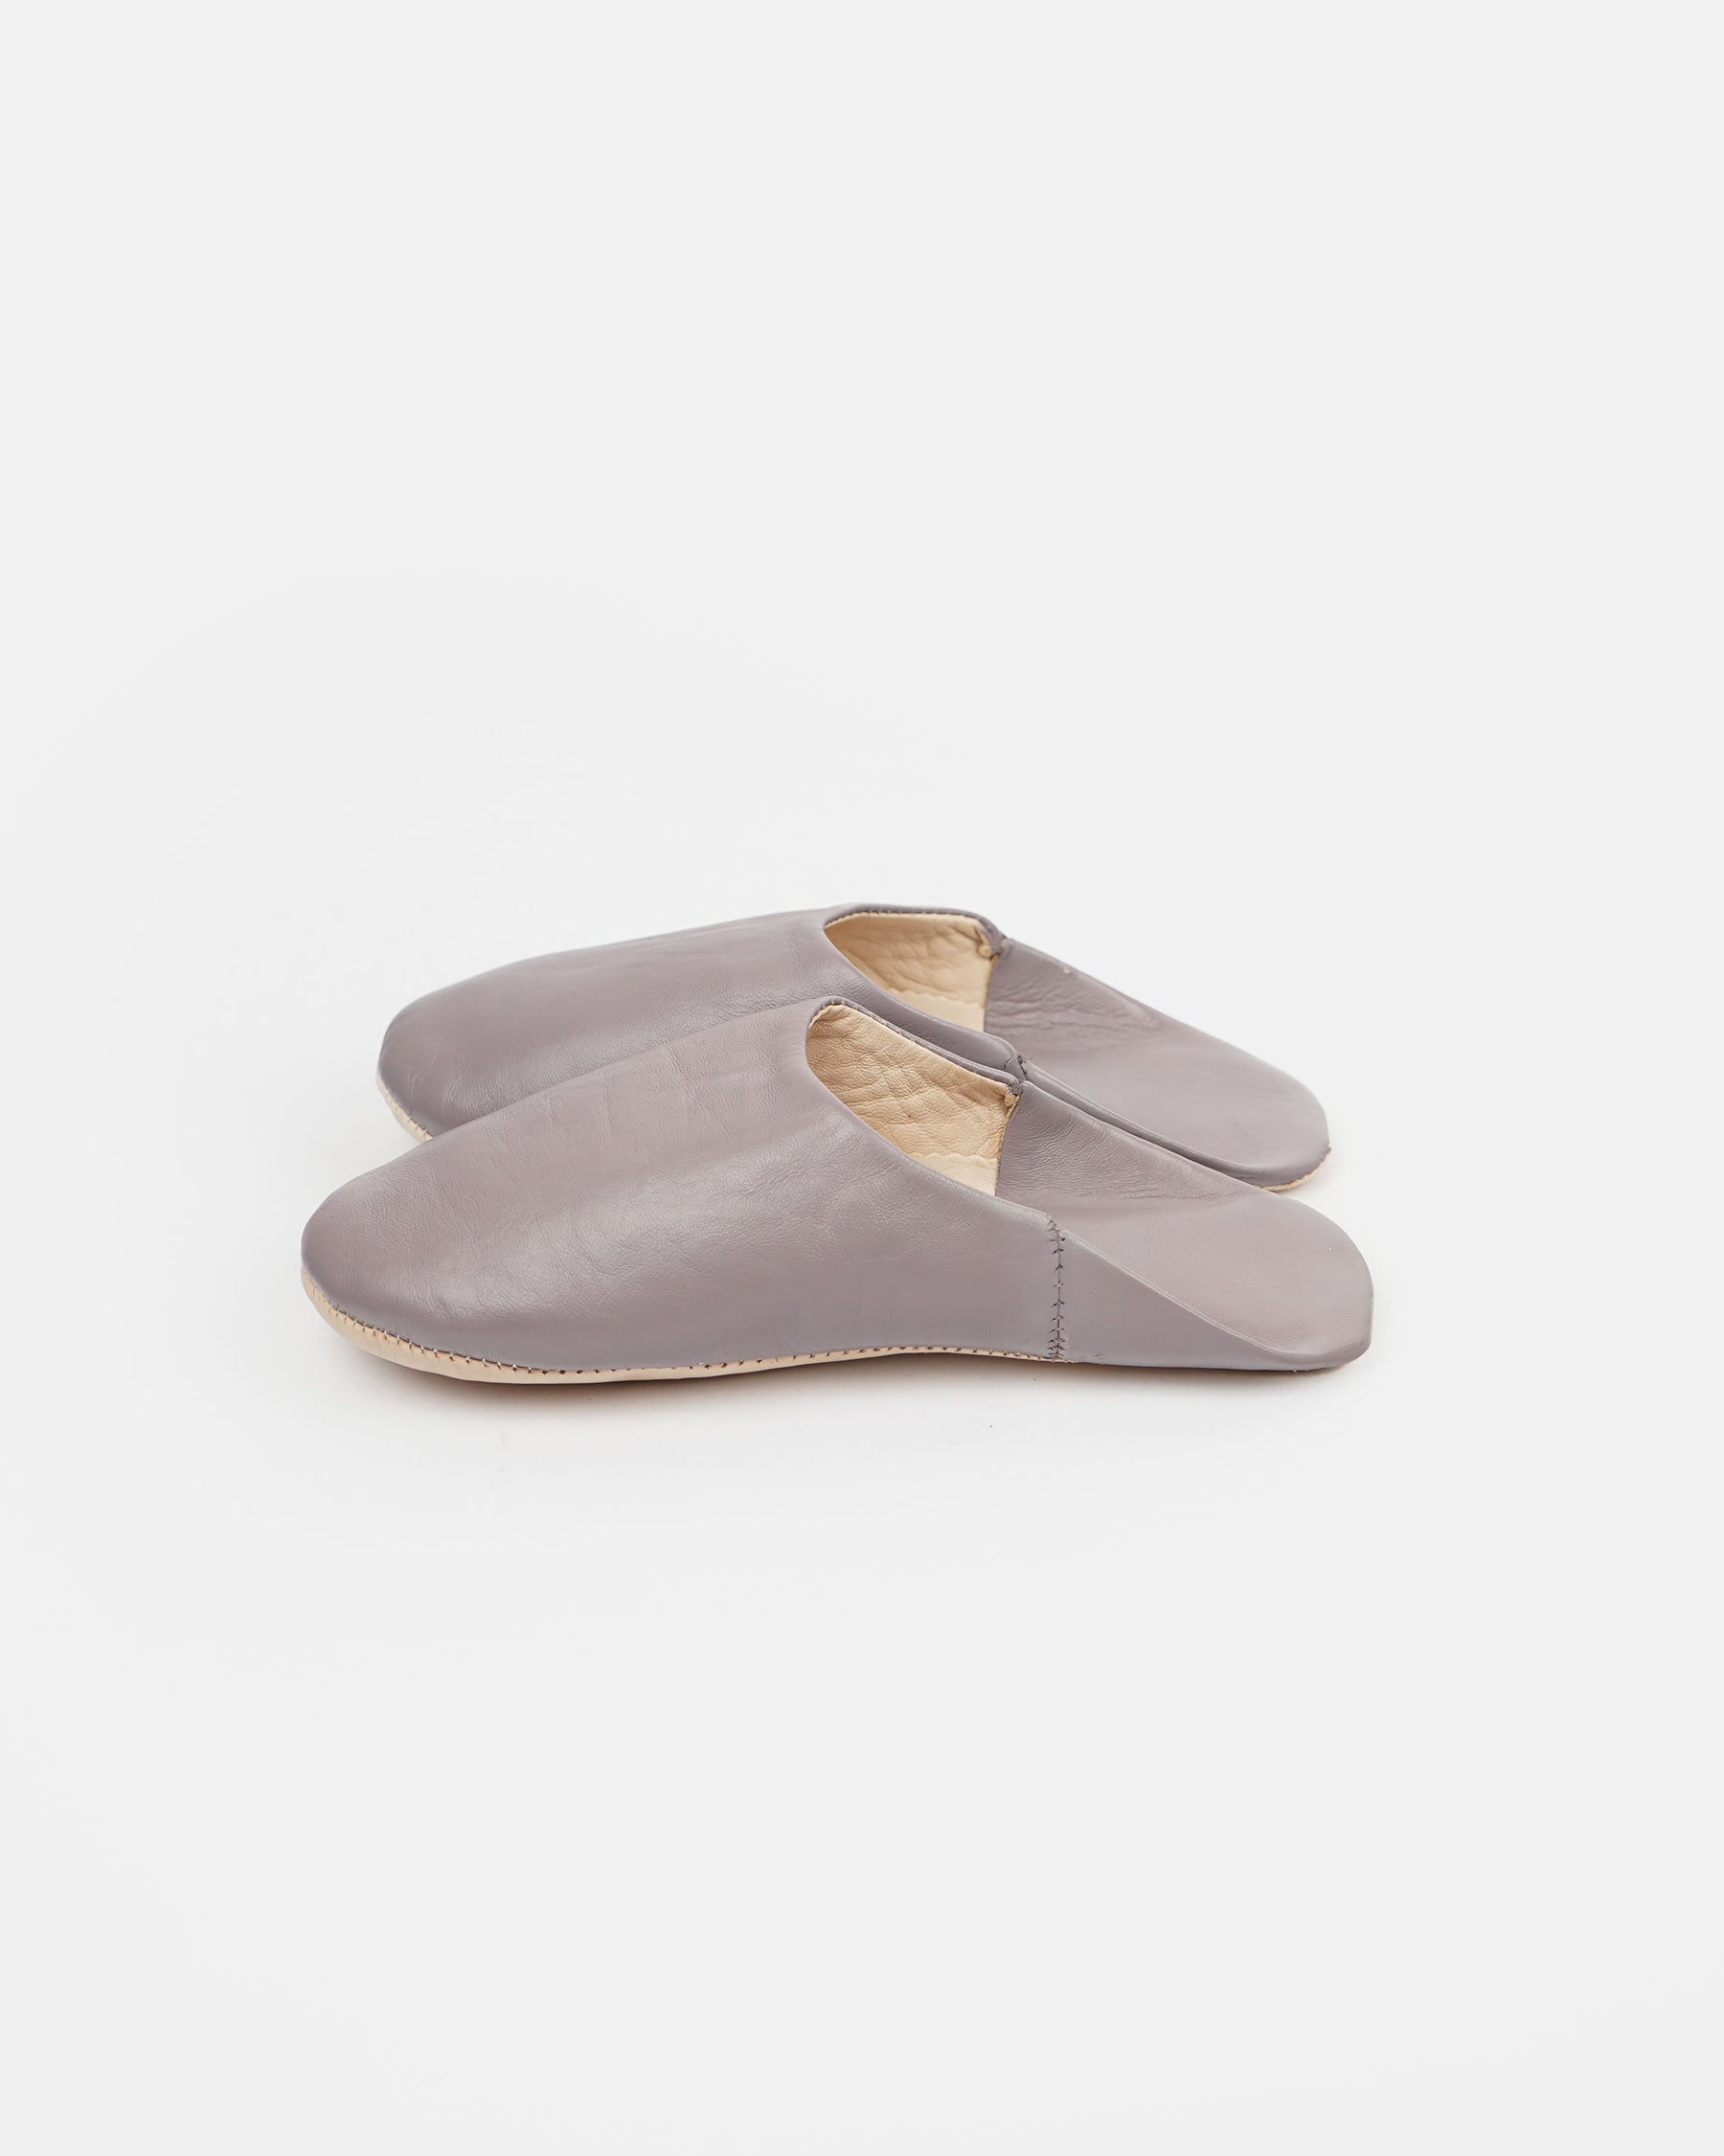 Moroccan Babouche Basic Slippers, Lavender